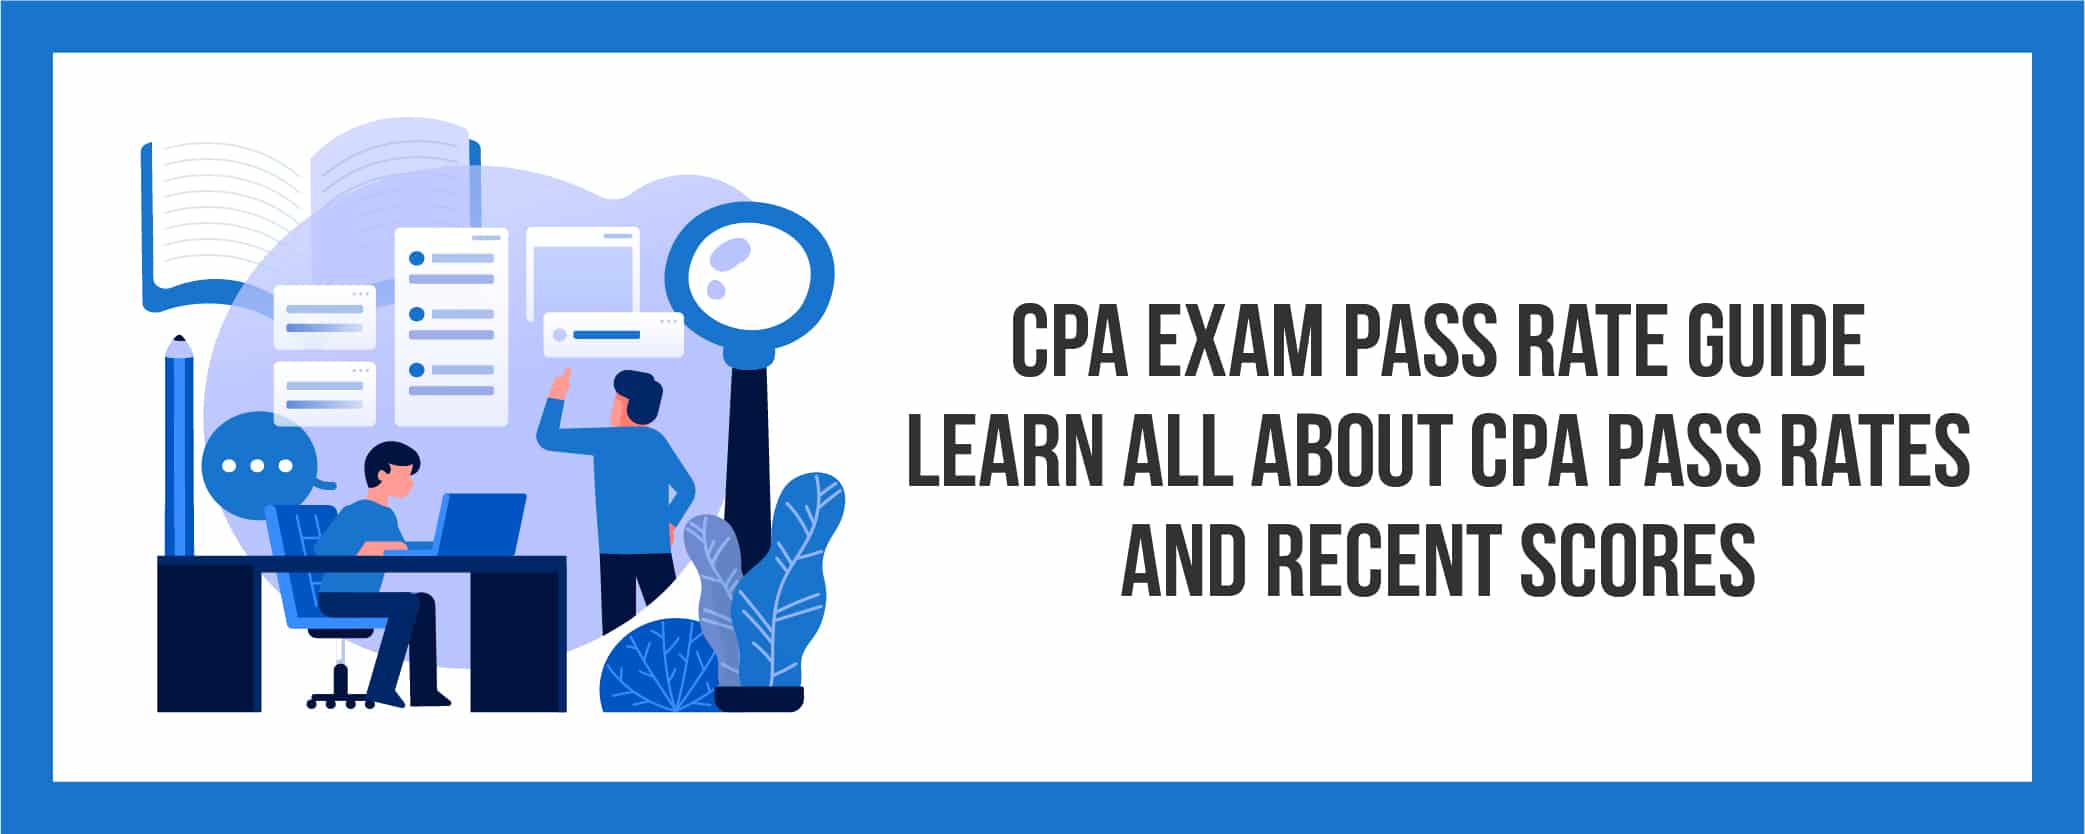 CPA Exam Pass Rate Guide